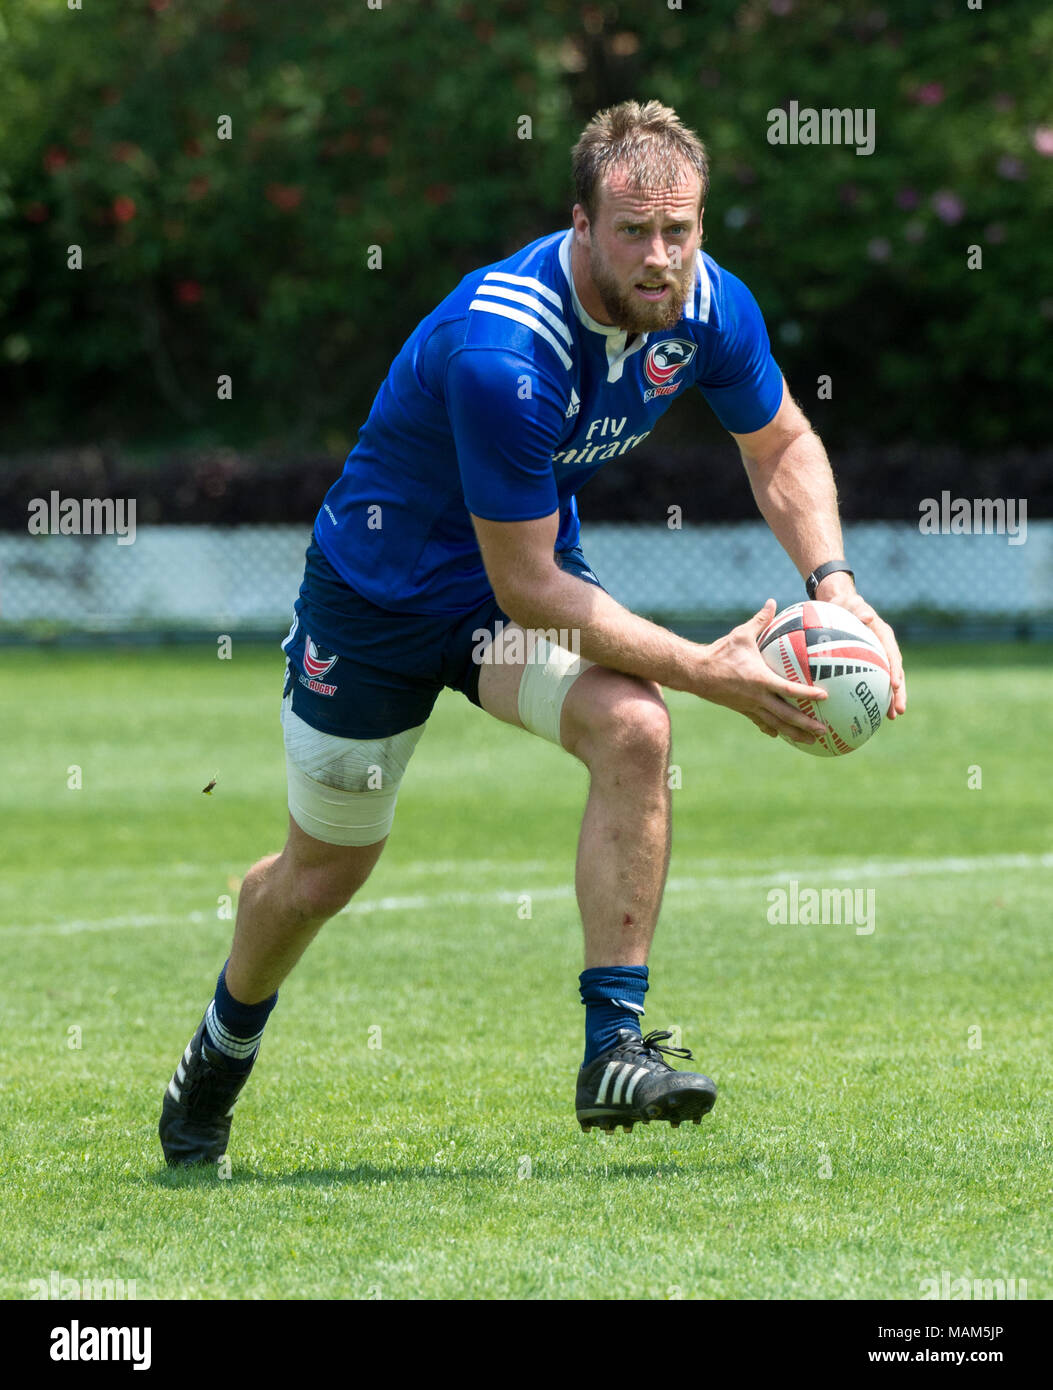 HONG KONG,HONG KONG SAR,CHINA:April 3rd 2018. The USA Rugby team conduct a training session at So Kon Po recreation ground ahead of their Hong Kong Rugby 7's matches. Captain Ben Pinkelman passes the ball during passing drills.Alamy Live News Stock Photo